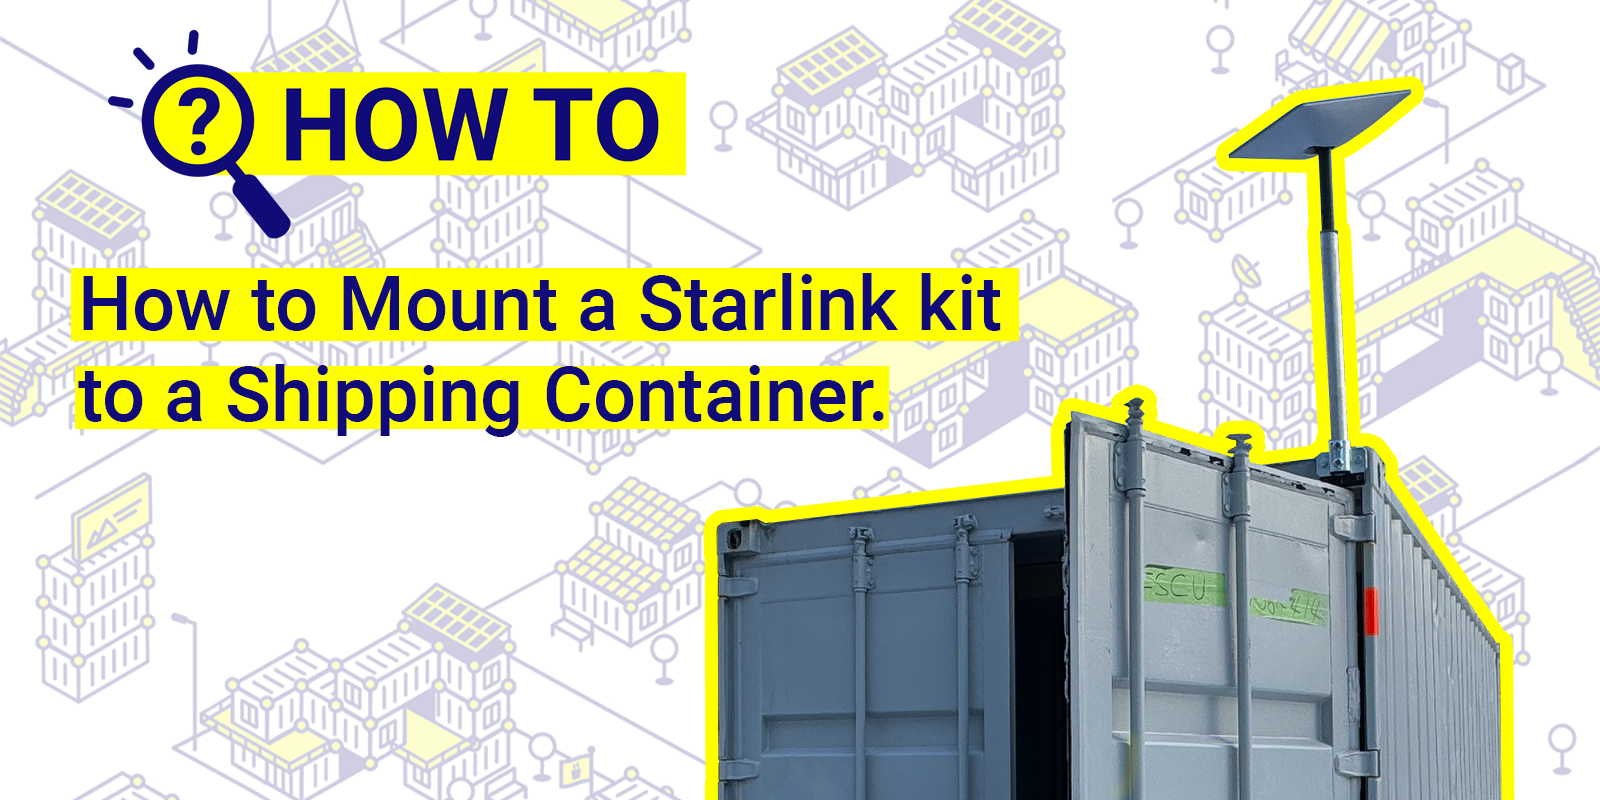 How to Mount a Starlink Kit to a Shipping Container